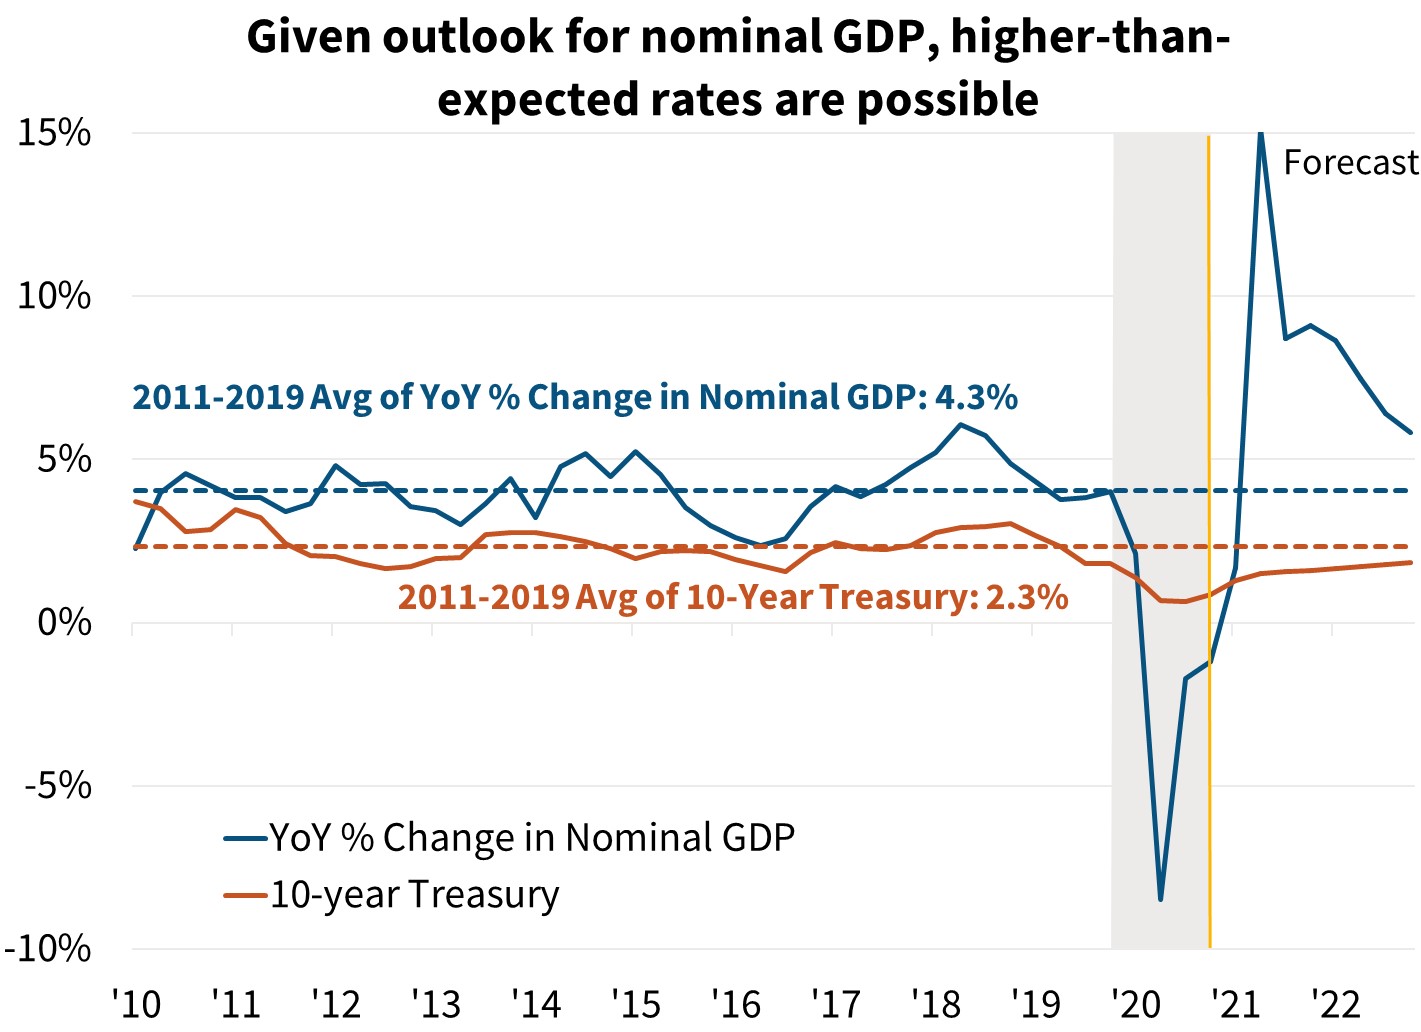  Given outlook for nominal GDP higher-than-expected rates are possible 